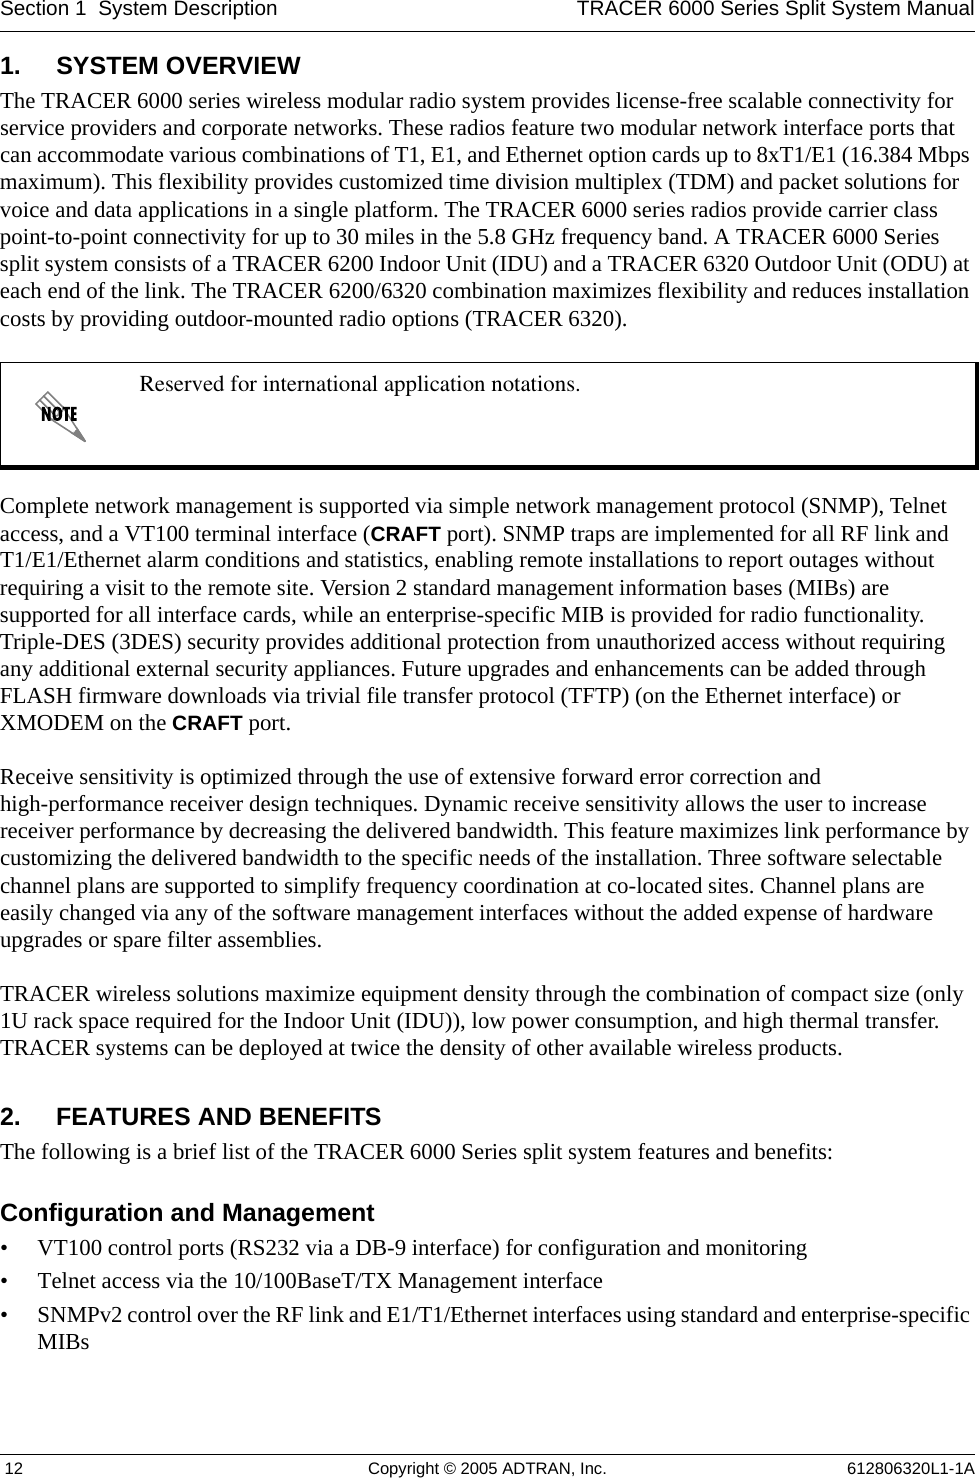 Section 1  System Description TRACER 6000 Series Split System Manual 12 Copyright © 2005 ADTRAN, Inc. 612806320L1-1A1. SYSTEM OVERVIEWThe TRACER 6000 series wireless modular radio system provides license-free scalable connectivity for service providers and corporate networks. These radios feature two modular network interface ports that can accommodate various combinations of T1, E1, and Ethernet option cards up to 8xT1/E1 (16.384 Mbps maximum). This flexibility provides customized time division multiplex (TDM) and packet solutions for voice and data applications in a single platform. The TRACER 6000 series radios provide carrier class point-to-point connectivity for up to 30 miles in the 5.8 GHz frequency band. A TRACER 6000 Series split system consists of a TRACER 6200 Indoor Unit (IDU) and a TRACER 6320 Outdoor Unit (ODU) at each end of the link. The TRACER 6200/6320 combination maximizes flexibility and reduces installation costs by providing outdoor-mounted radio options (TRACER 6320).Complete network management is supported via simple network management protocol (SNMP), Telnet access, and a VT100 terminal interface (CRAFT port). SNMP traps are implemented for all RF link and T1/E1/Ethernet alarm conditions and statistics, enabling remote installations to report outages without requiring a visit to the remote site. Version 2 standard management information bases (MIBs) are supported for all interface cards, while an enterprise-specific MIB is provided for radio functionality. Triple-DES (3DES) security provides additional protection from unauthorized access without requiring any additional external security appliances. Future upgrades and enhancements can be added through FLASH firmware downloads via trivial file transfer protocol (TFTP) (on the Ethernet interface) or XMODEM on the CRAFT port.Receive sensitivity is optimized through the use of extensive forward error correction and high-performance receiver design techniques. Dynamic receive sensitivity allows the user to increase receiver performance by decreasing the delivered bandwidth. This feature maximizes link performance by customizing the delivered bandwidth to the specific needs of the installation. Three software selectable channel plans are supported to simplify frequency coordination at co-located sites. Channel plans are easily changed via any of the software management interfaces without the added expense of hardware upgrades or spare filter assemblies.TRACER wireless solutions maximize equipment density through the combination of compact size (only 1U rack space required for the Indoor Unit (IDU)), low power consumption, and high thermal transfer. TRACER systems can be deployed at twice the density of other available wireless products.2. FEATURES AND BENEFITSThe following is a brief list of the TRACER 6000 Series split system features and benefits:Configuration and Management• VT100 control ports (RS232 via a DB-9 interface) for configuration and monitoring• Telnet access via the 10/100BaseT/TX Management interface• SNMPv2 control over the RF link and E1/T1/Ethernet interfaces using standard and enterprise-specific MIBsReserved for international application notations. 